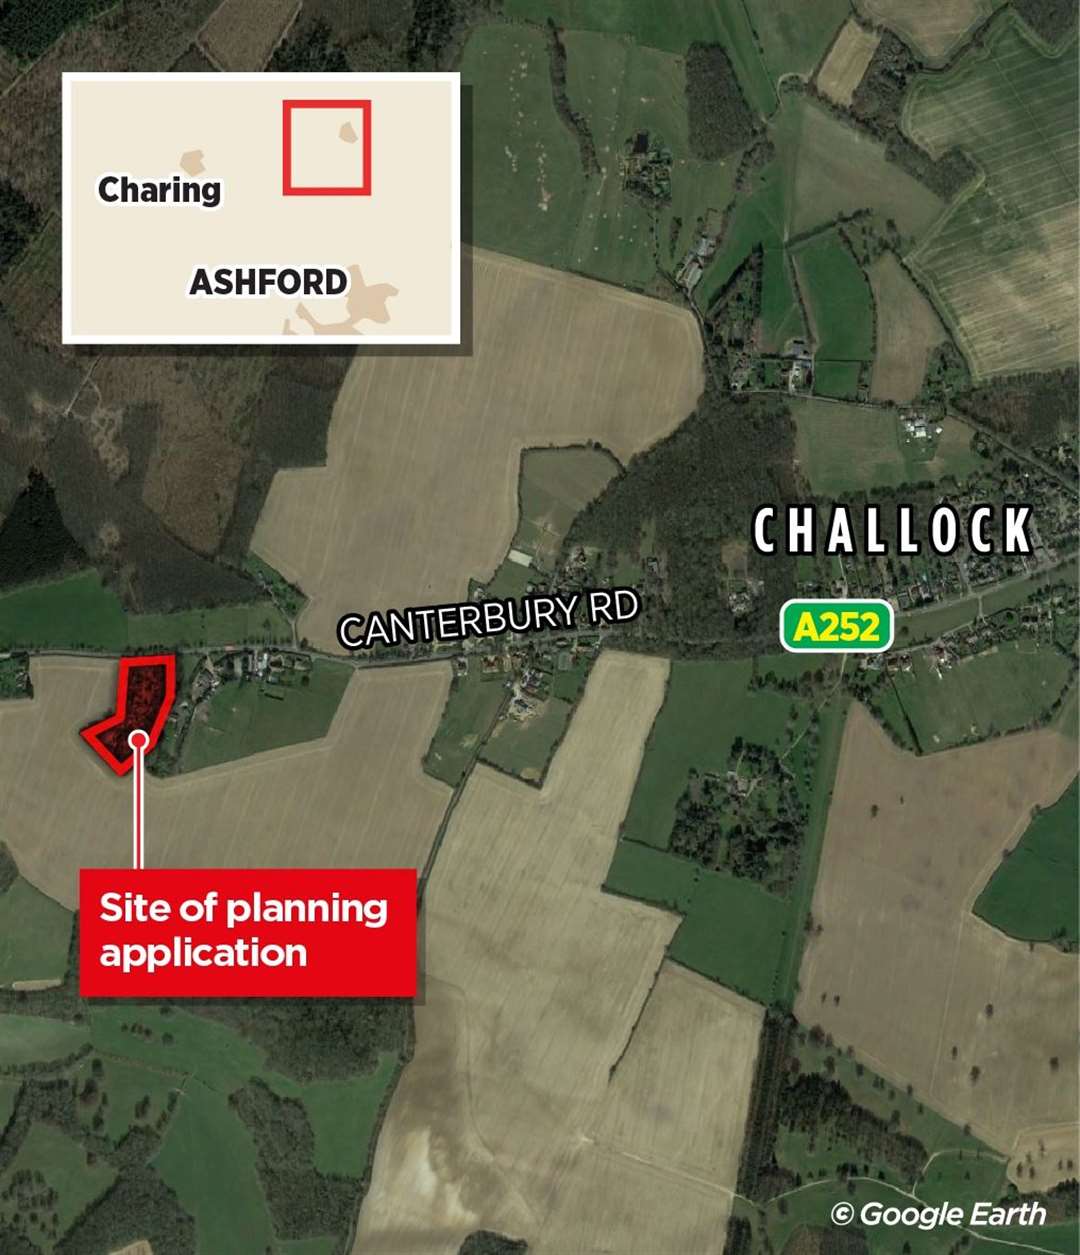 The holiday homes are proposed for land in Challock